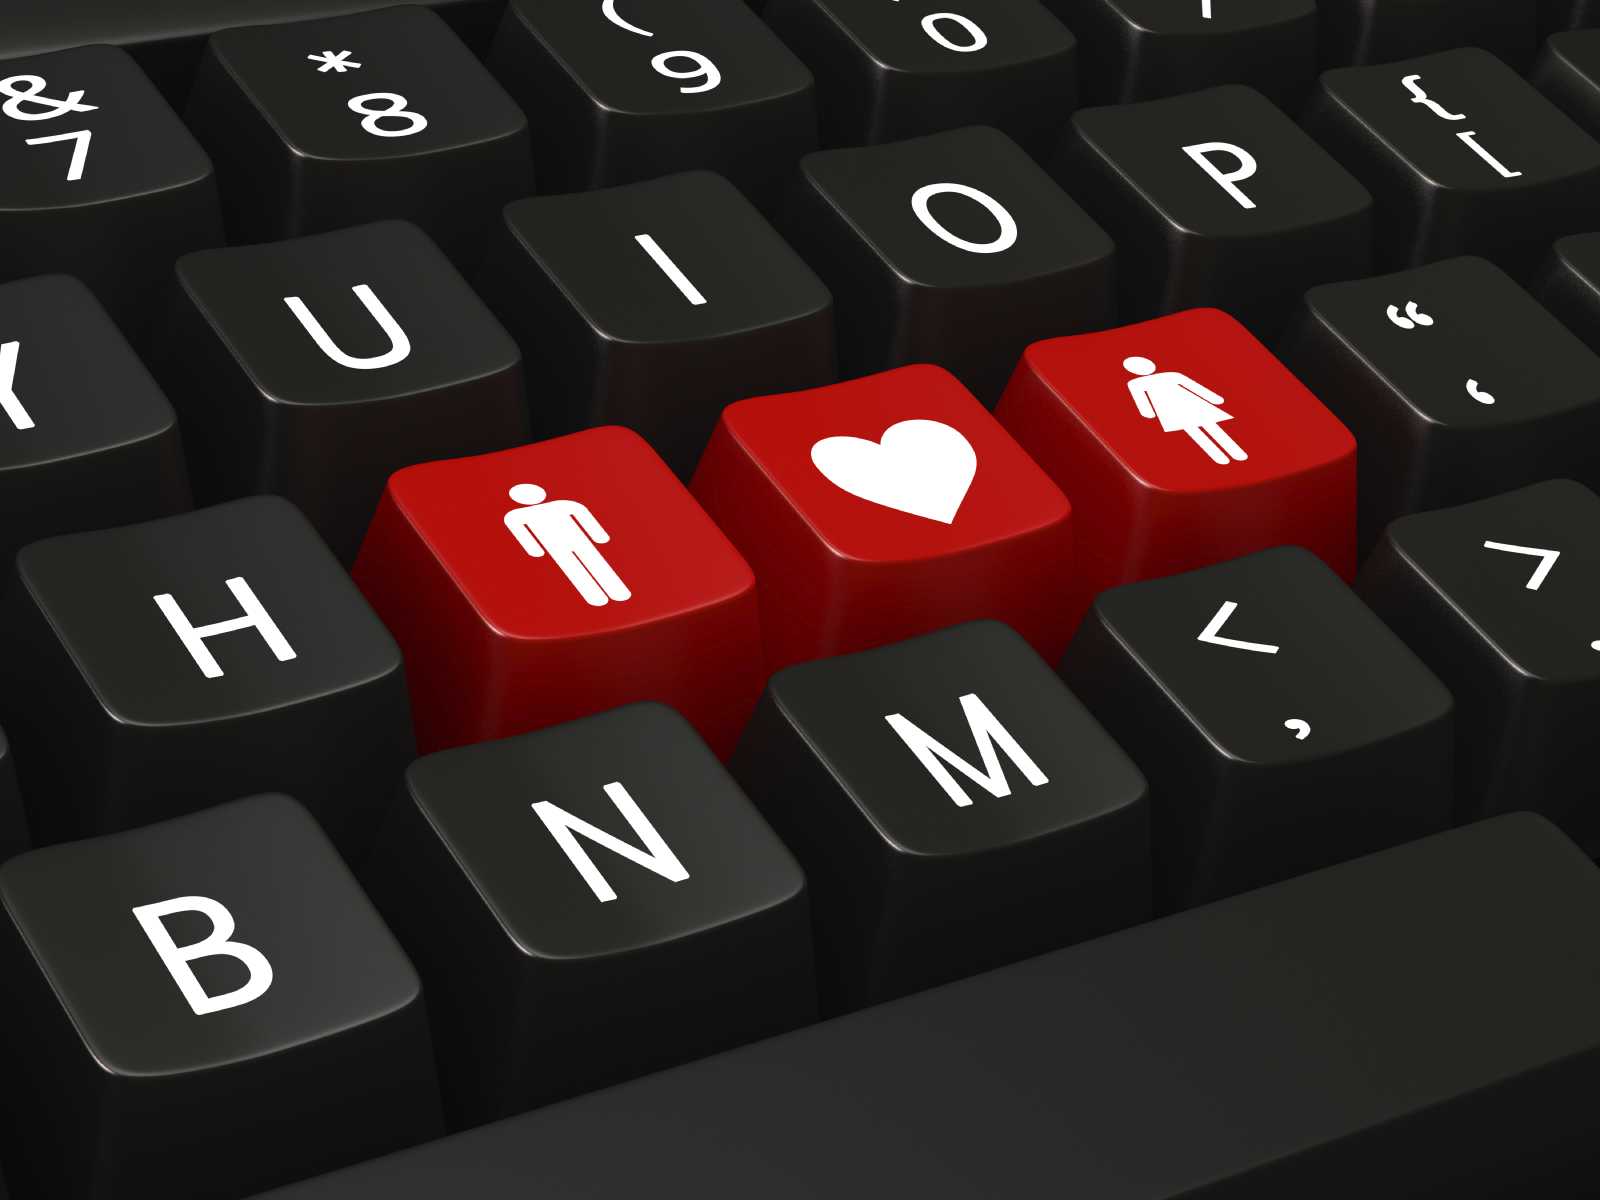 Cyber relationships: creepy or cute? – The Lane Tech Champion